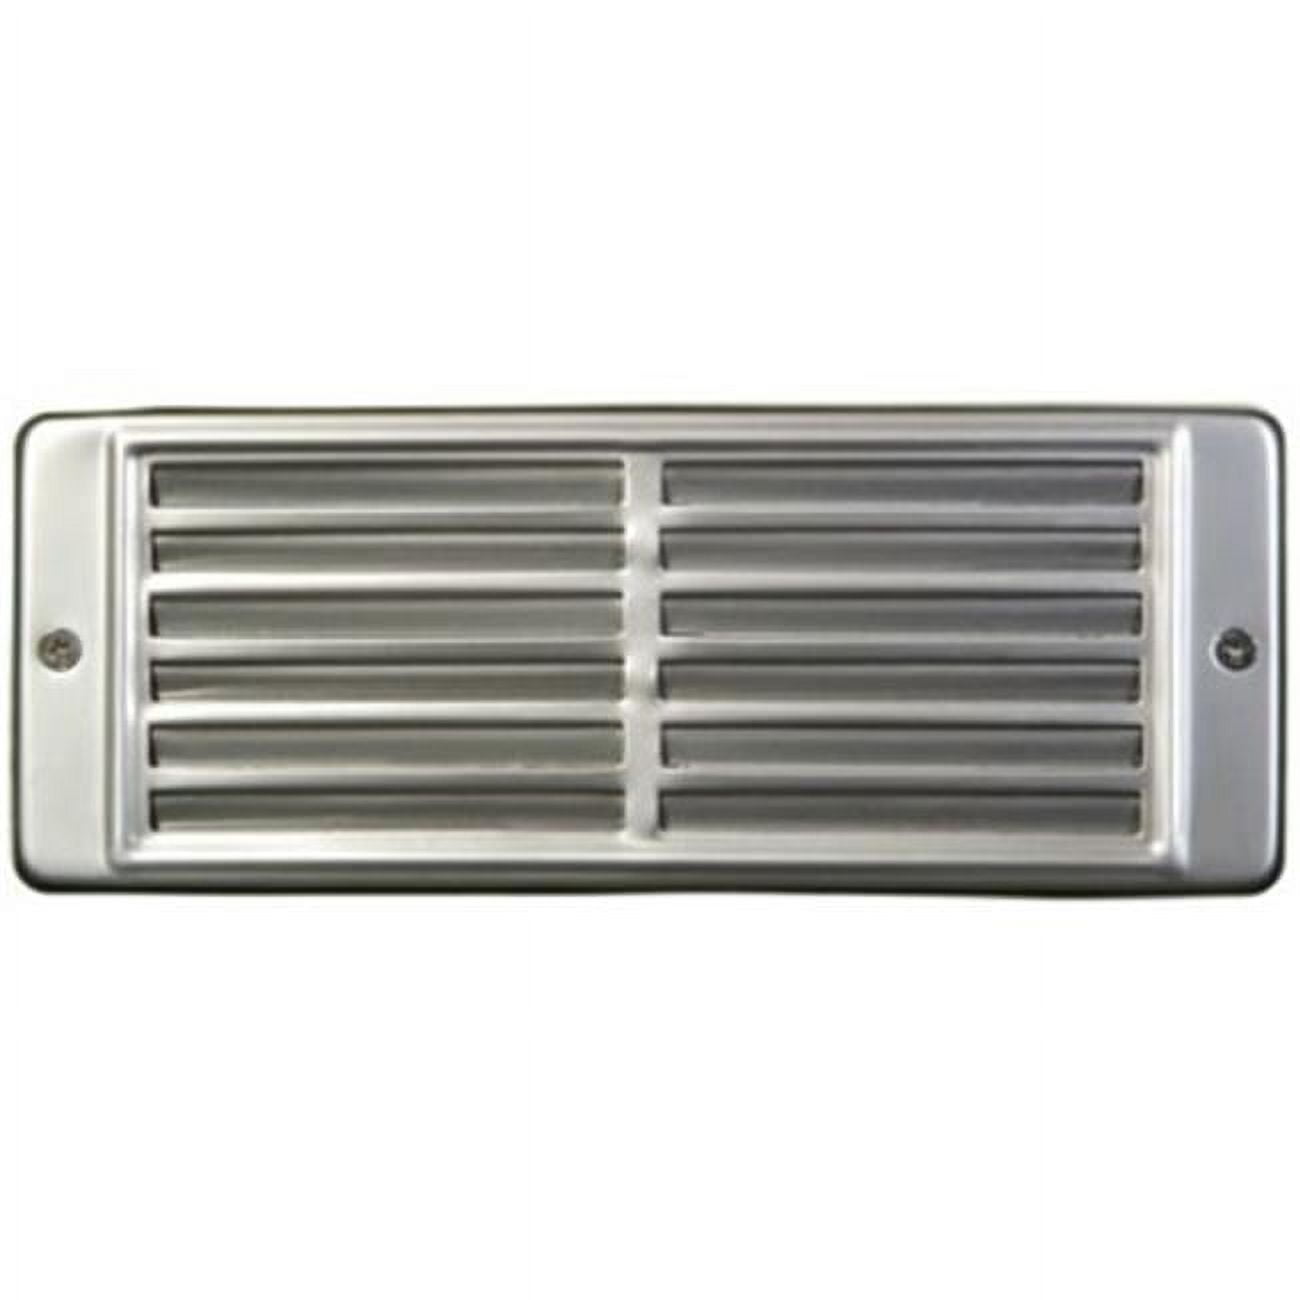 Recessed Louvered Down Brick, Step & Wall Fixture, 304 Stainless Steel